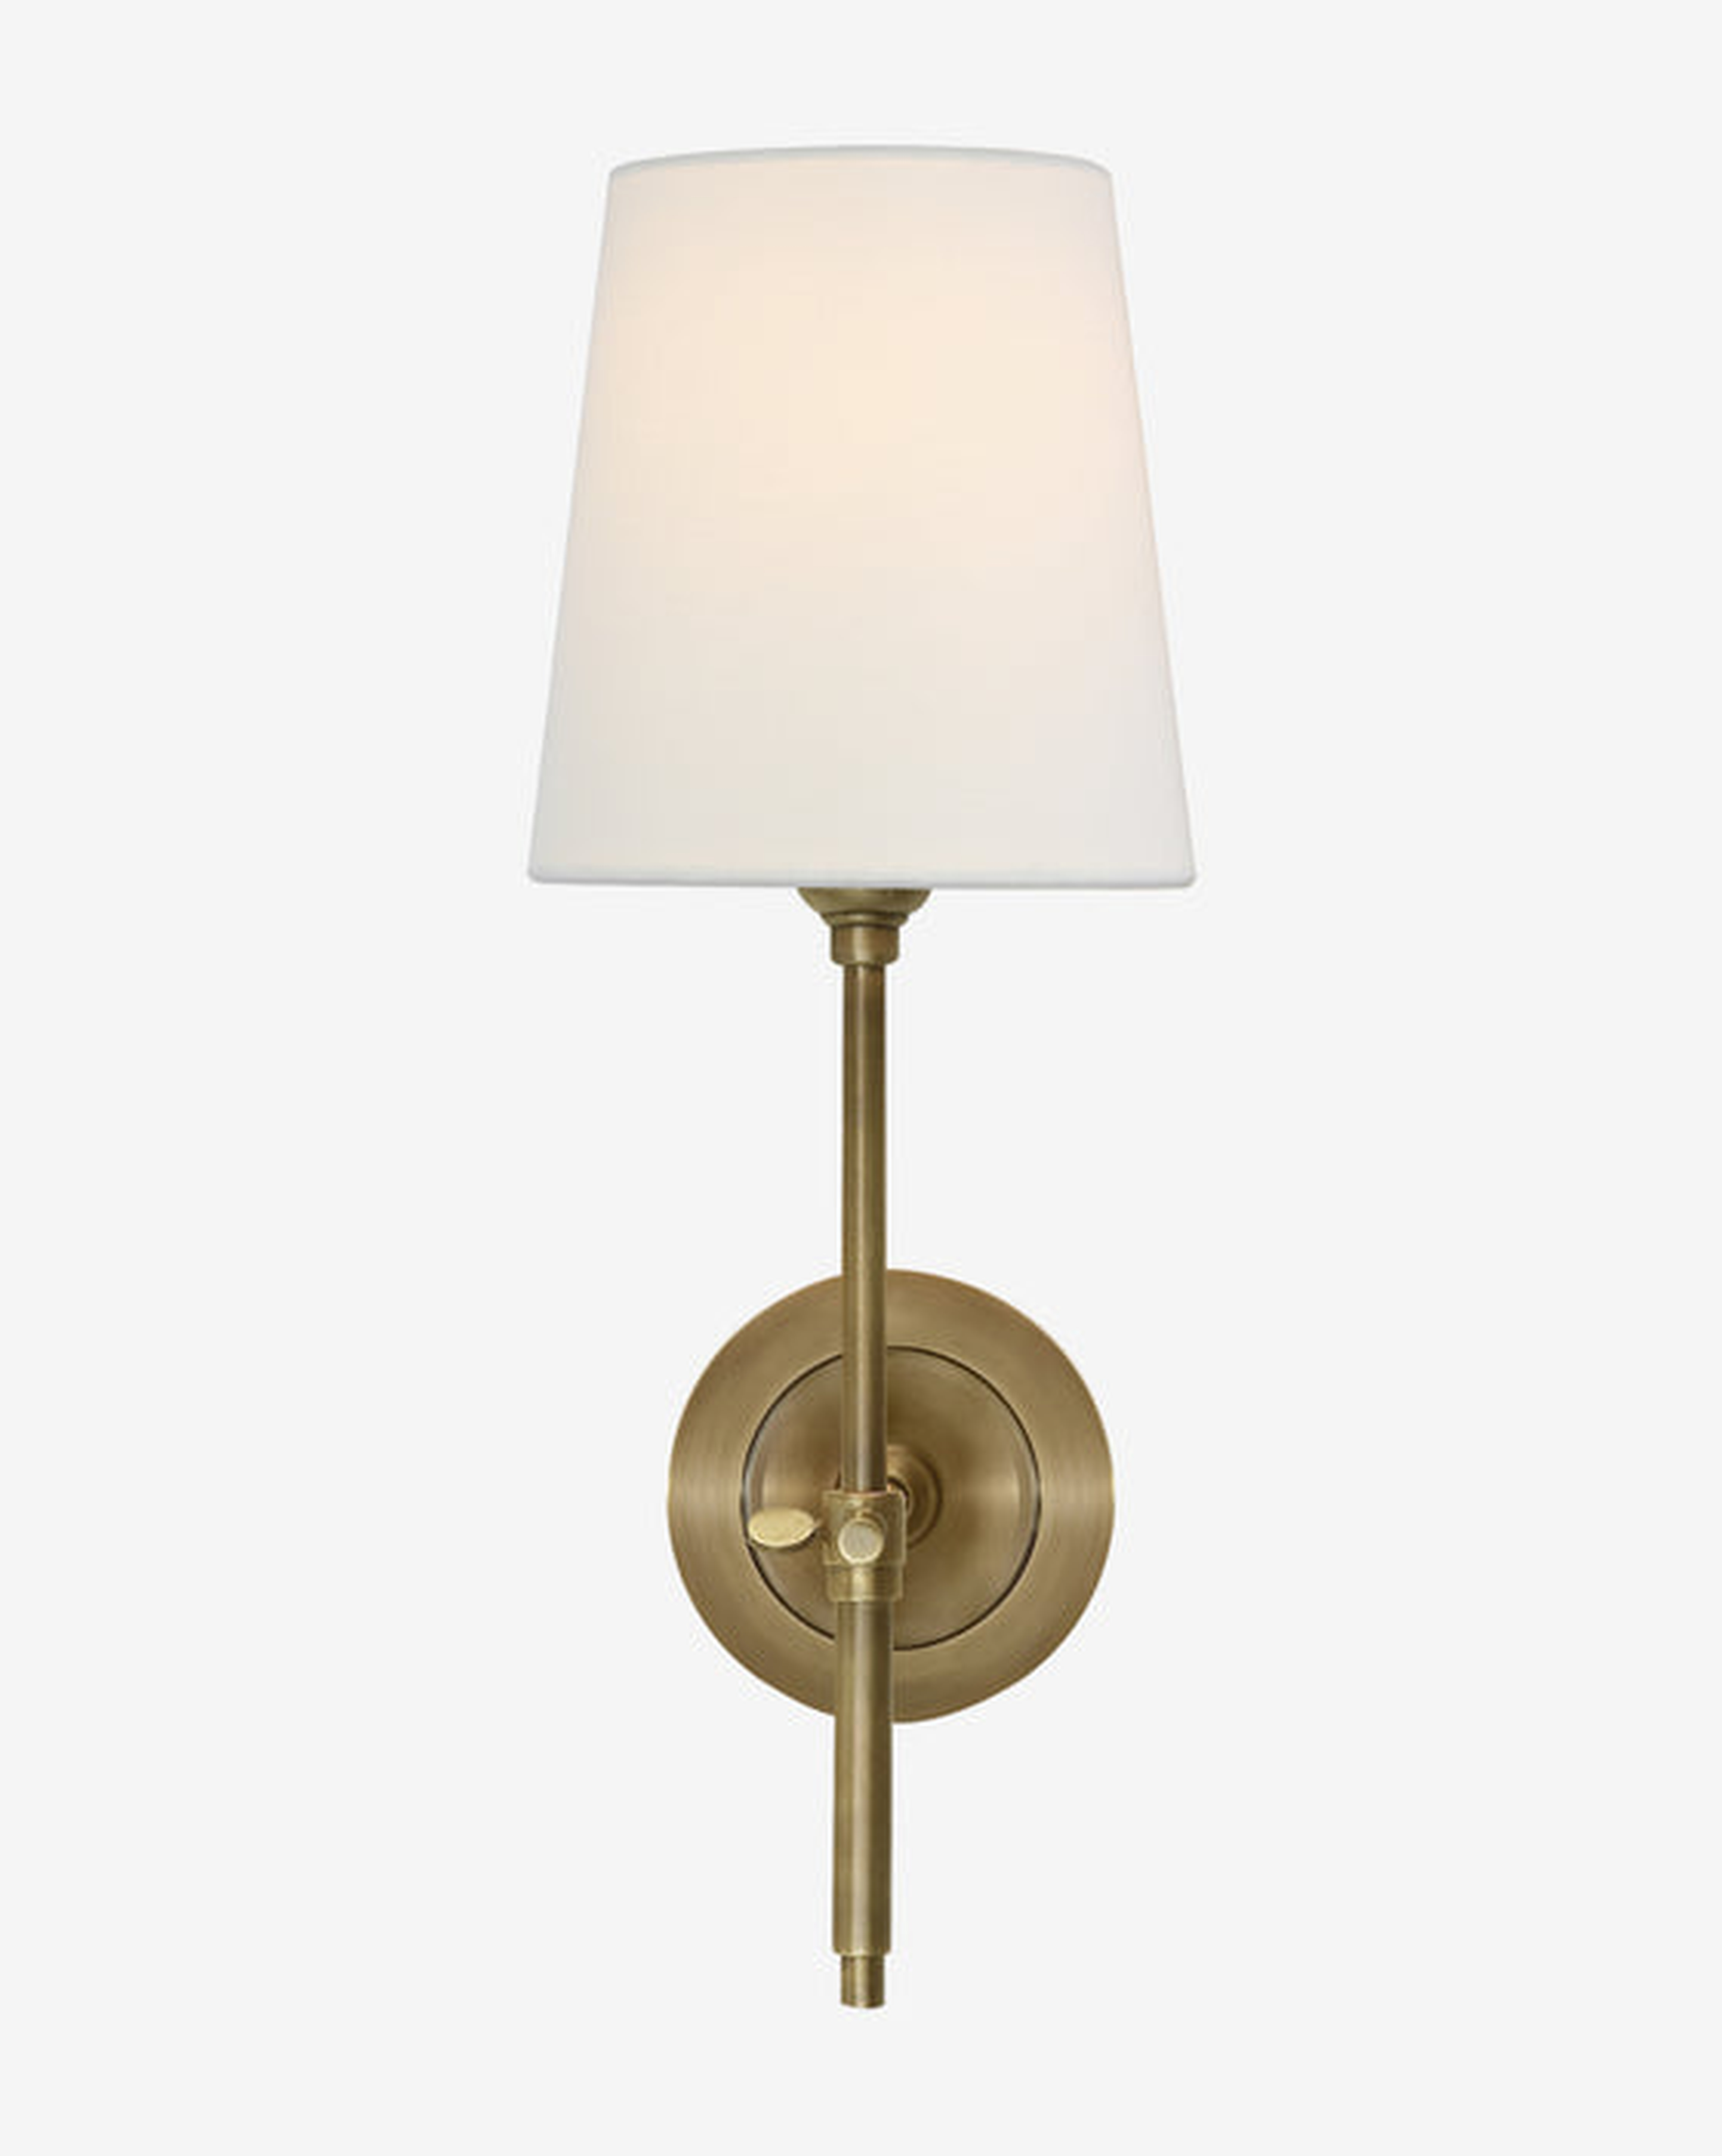 BRYANT SCONCE - Hand-Rubbed Antique Brass - McGee & Co.